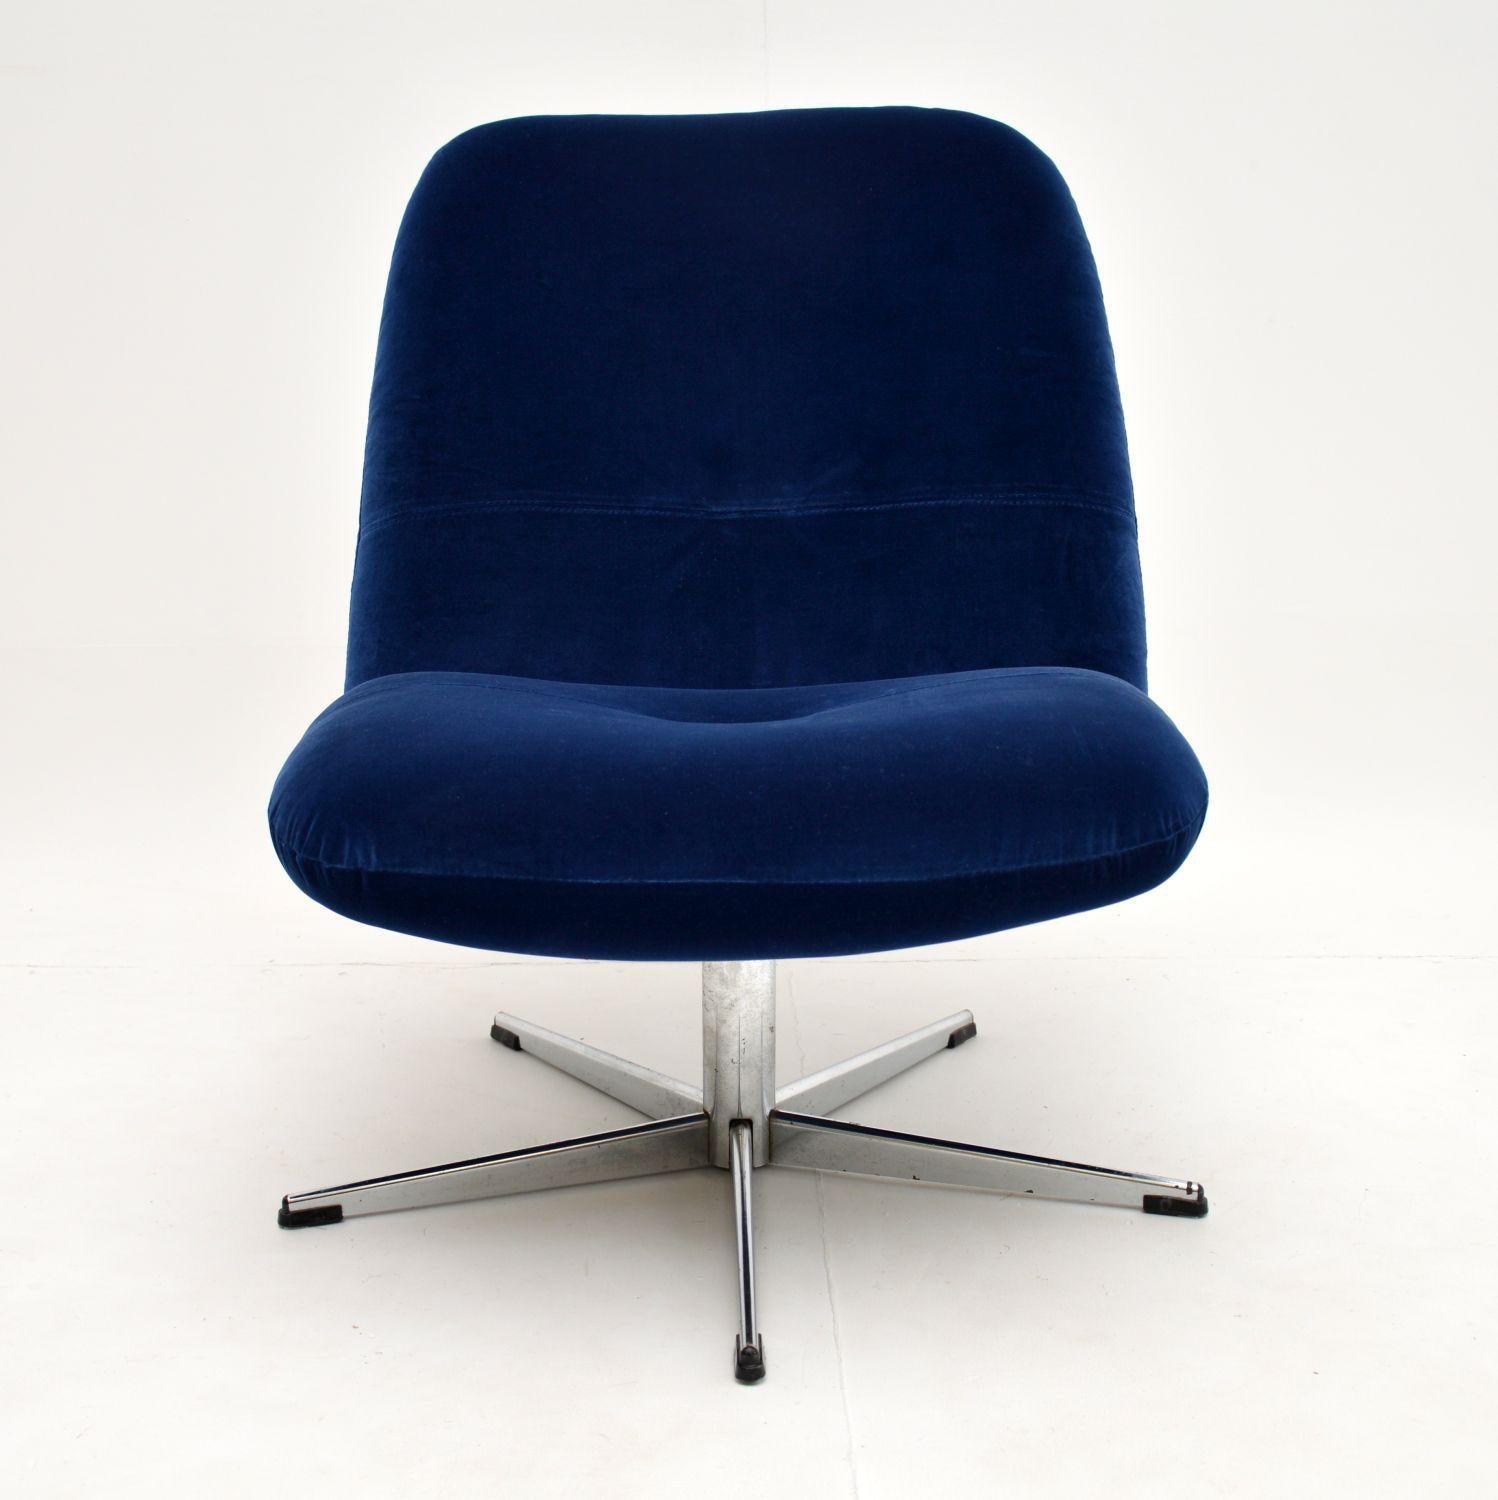 A sweet and stylish vintage swivel lounge chair, this dates from the 1960s. It is very comfortable, it sits and swivels on a lovely five prong chrome base.

We have had this fully re-upholstered in a lovely blue velvet fabric, it is in excellent